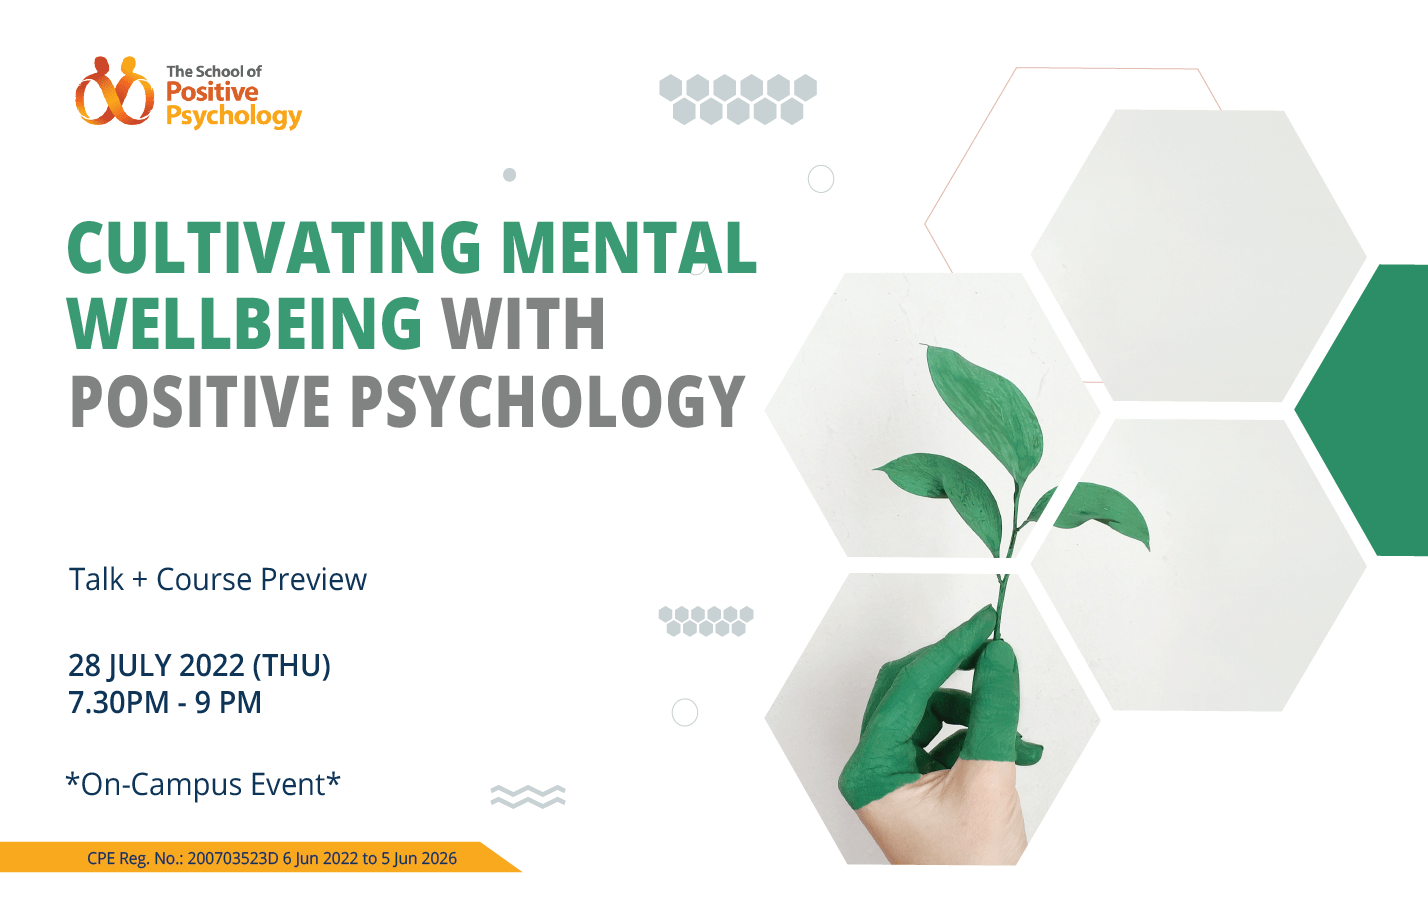 Cultivating Mental Wellbeing With Positive Psychology Talk + Course Preview